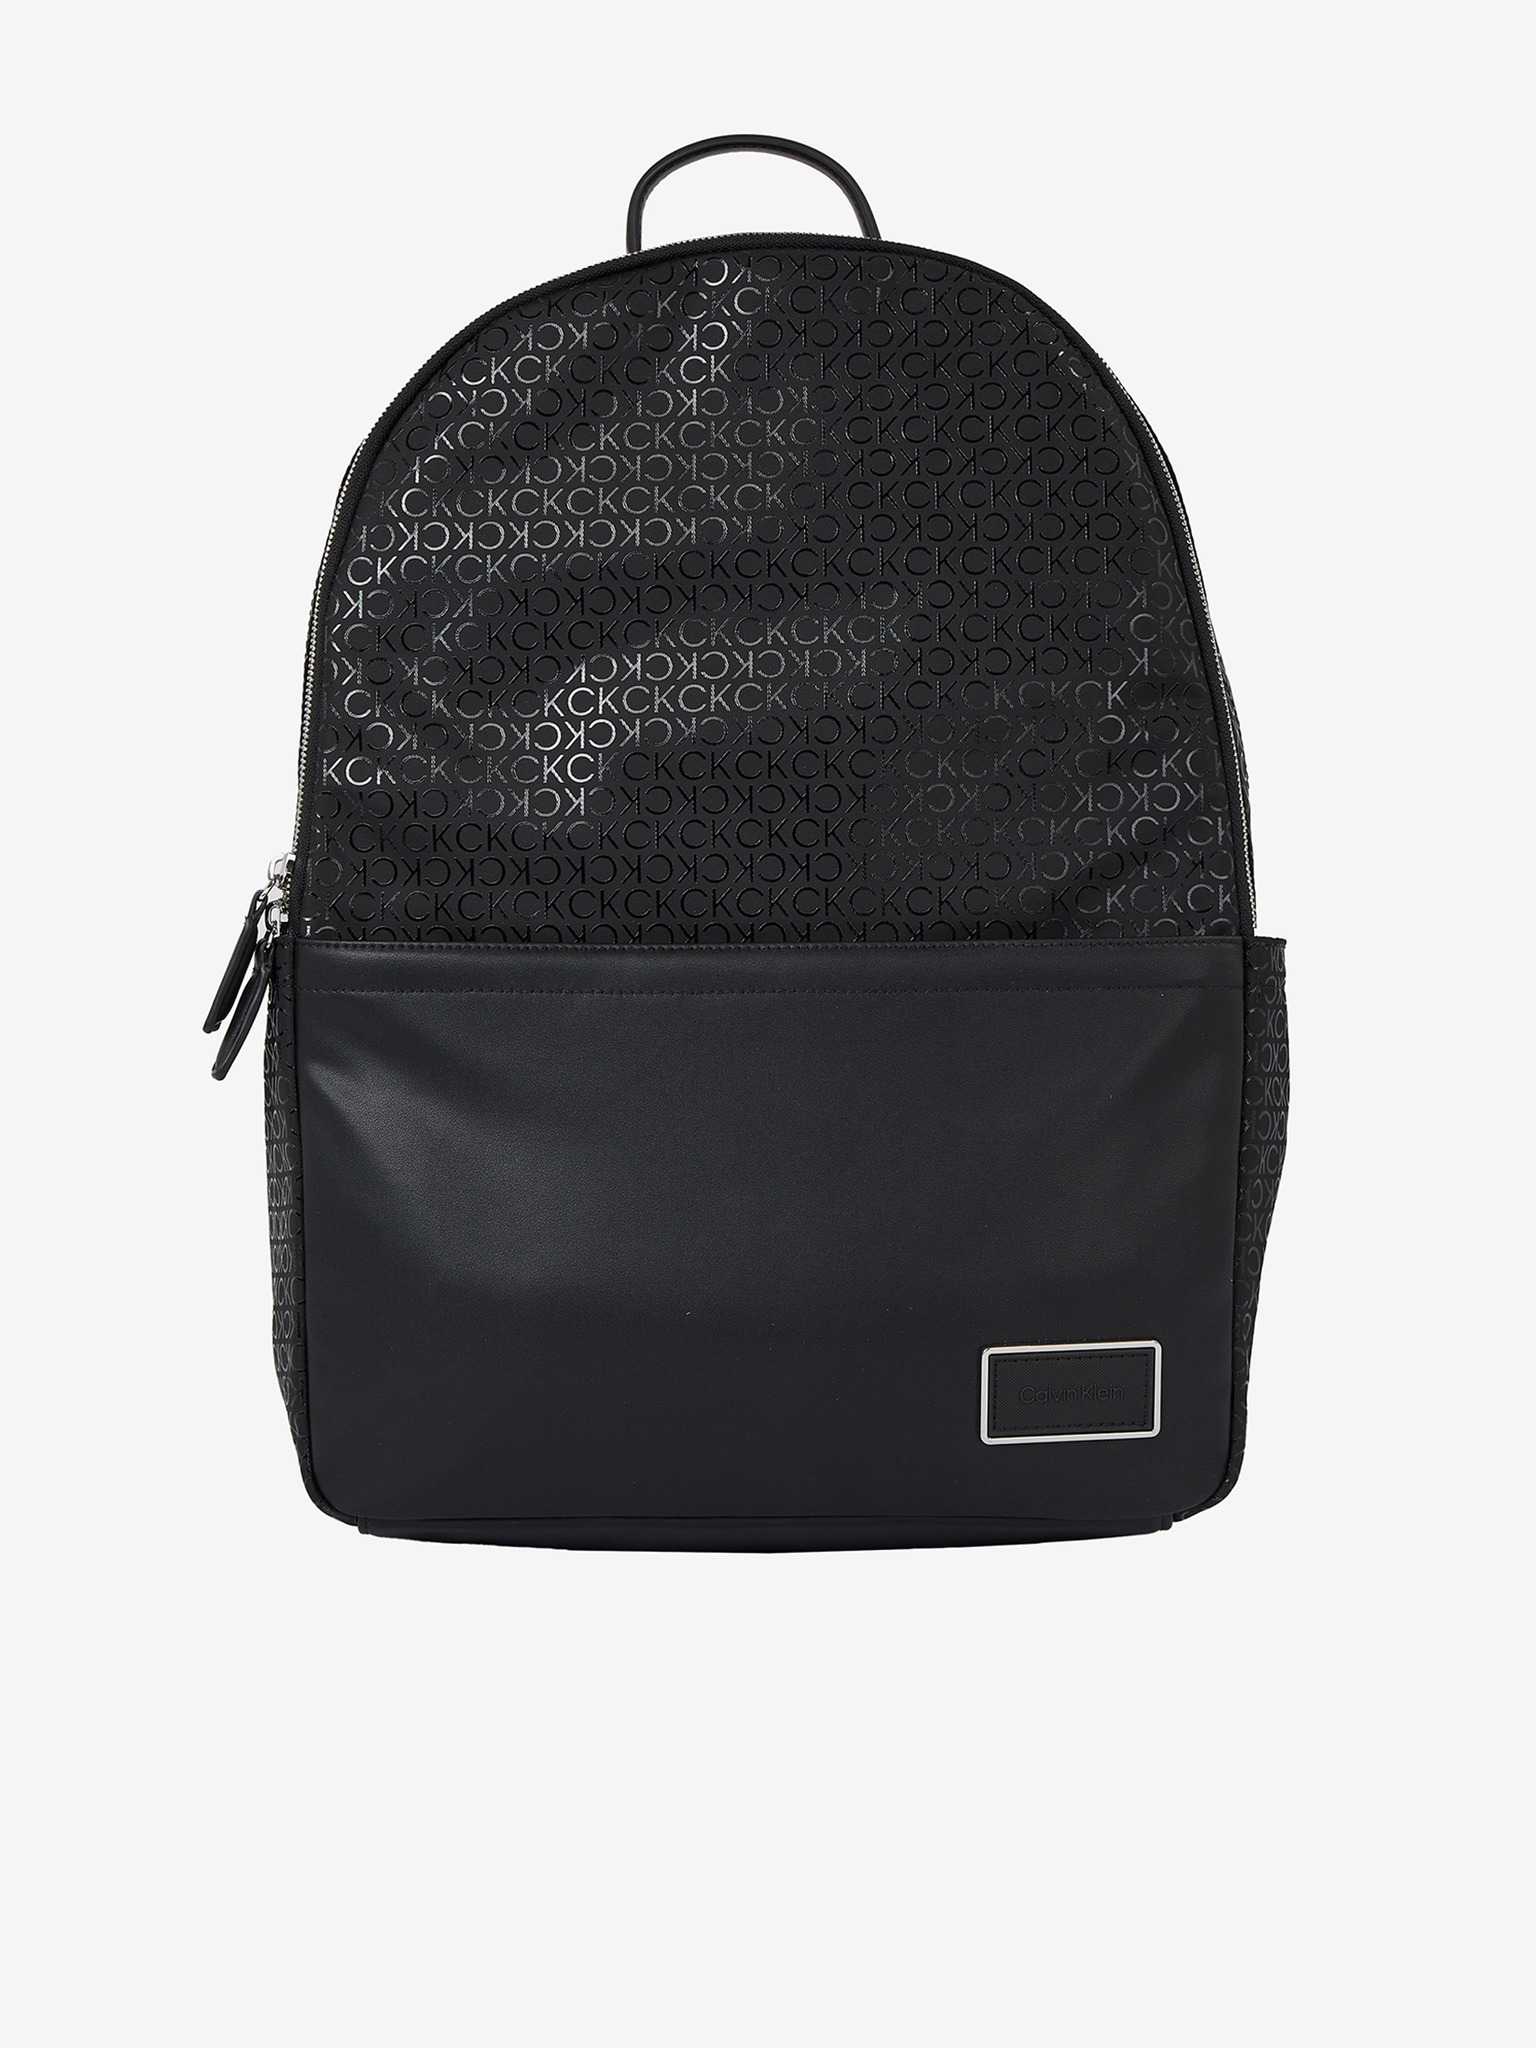 I want to buy this backpack but don't know which model of Calvin Klein this  is. I only have this picture from a year ago. Can anyone help me? : r/ backpacks